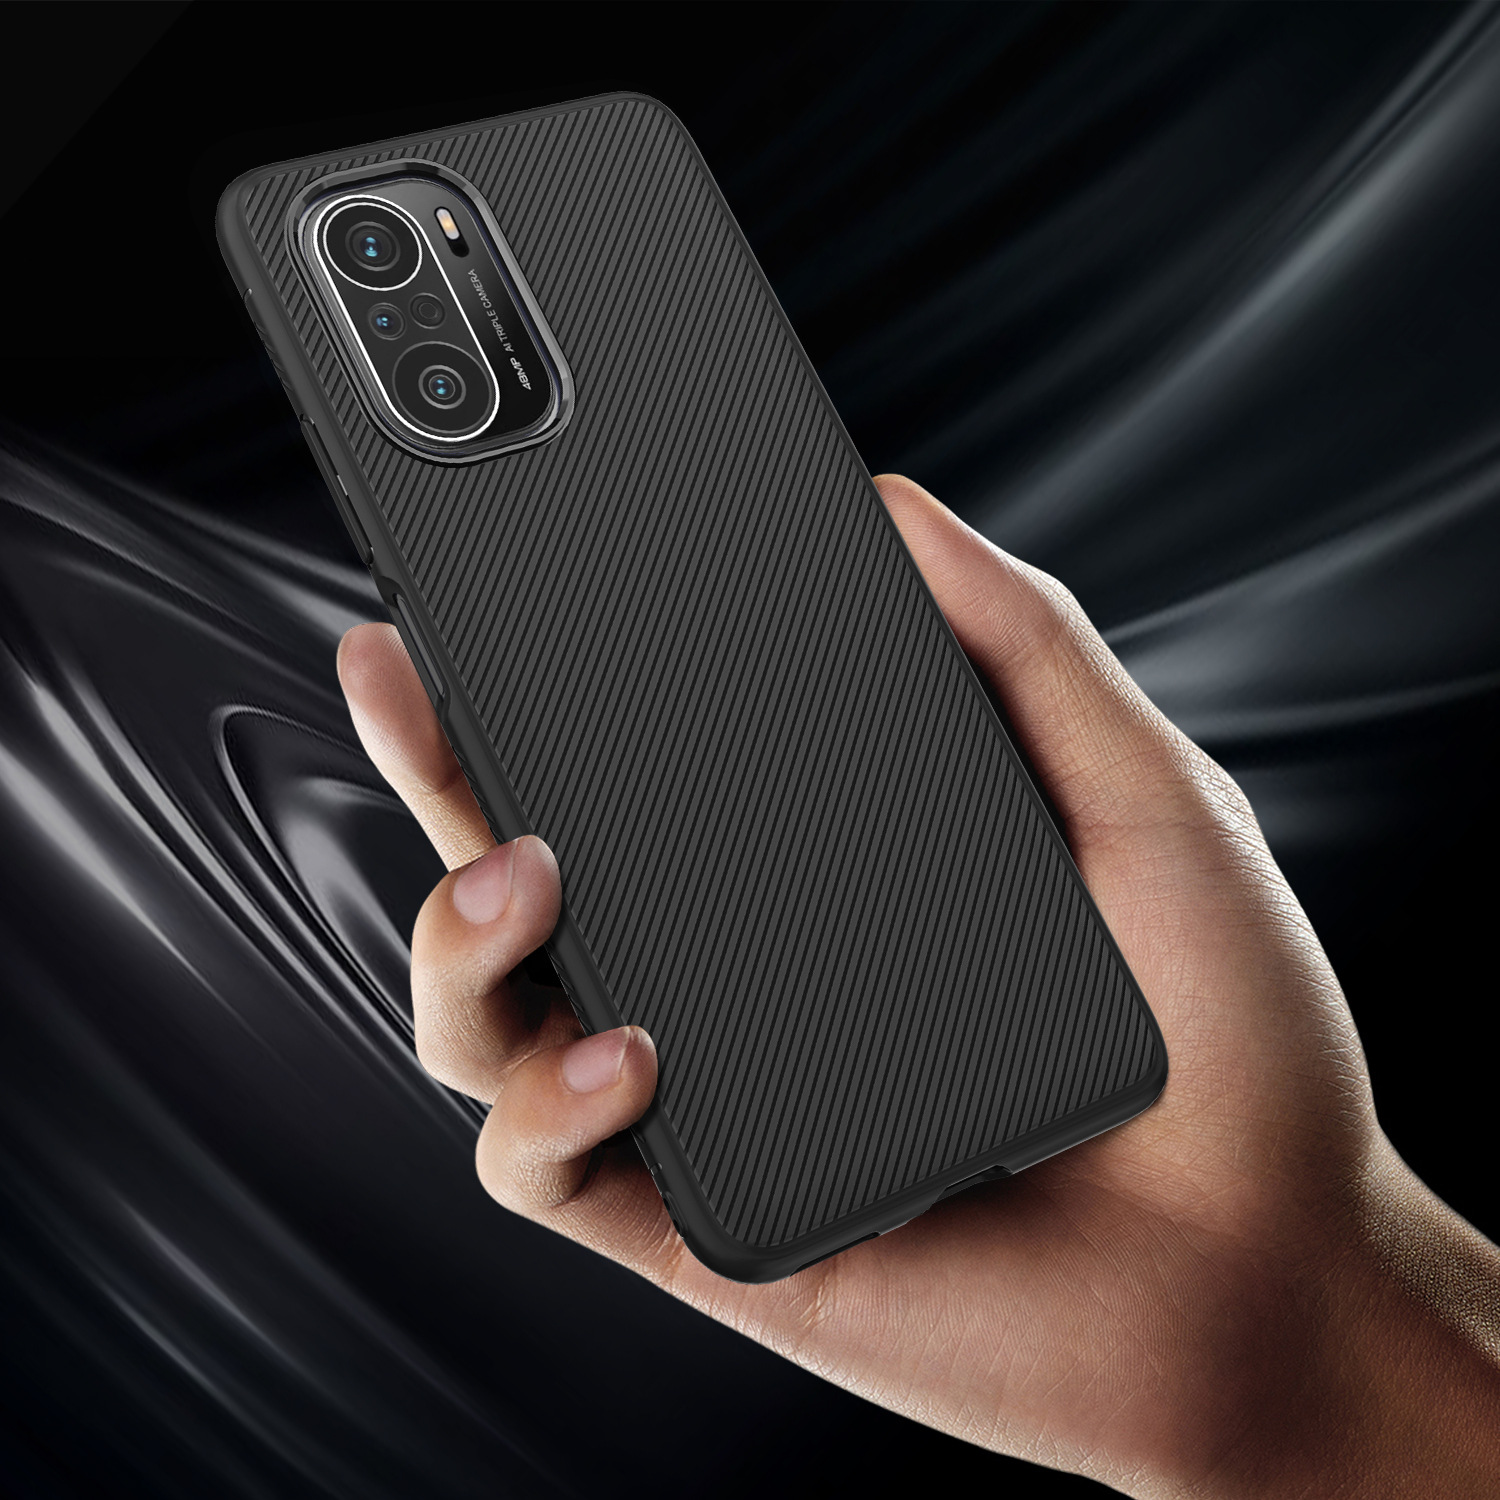 Bakeey-for-POCO-F3-Global-Version-Case-Carbon-Fiber-Texture-Slim-Soft-Silicone-Shockproof-Protective-1844941-1